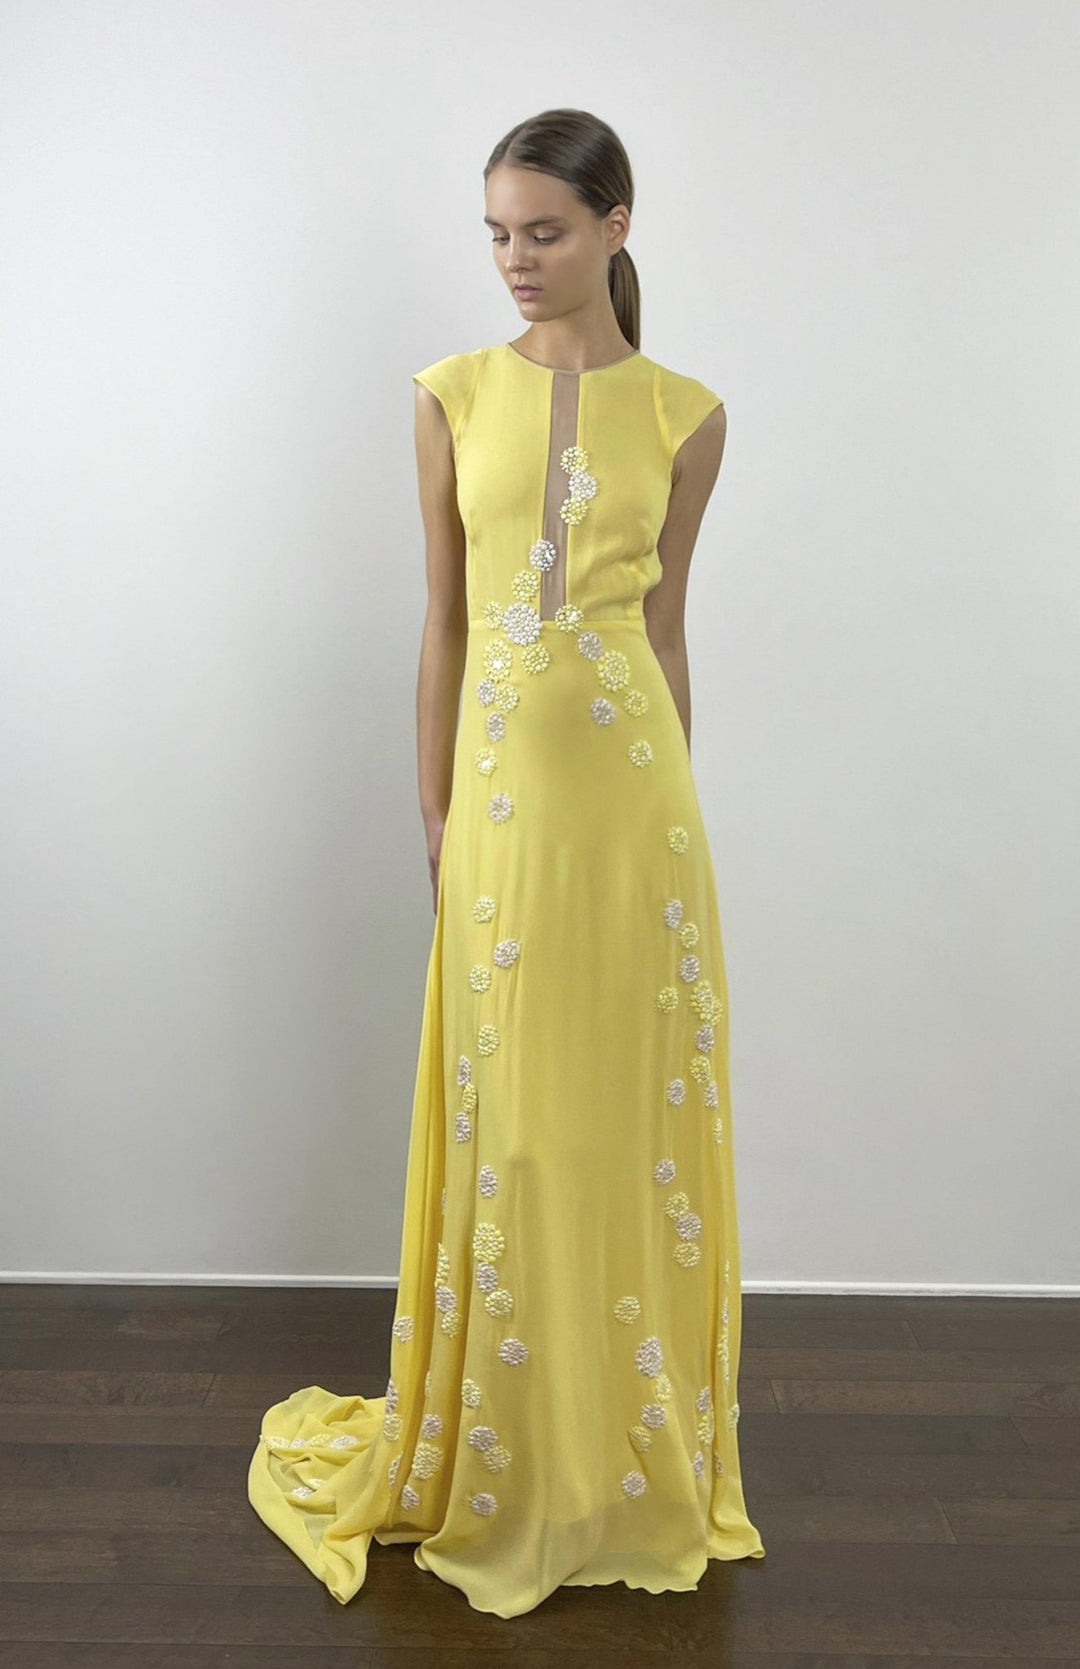 Chic, Yellow, sleeveless, long evening dress with sheer, nude panels, hand applique lace embellishment and long train.